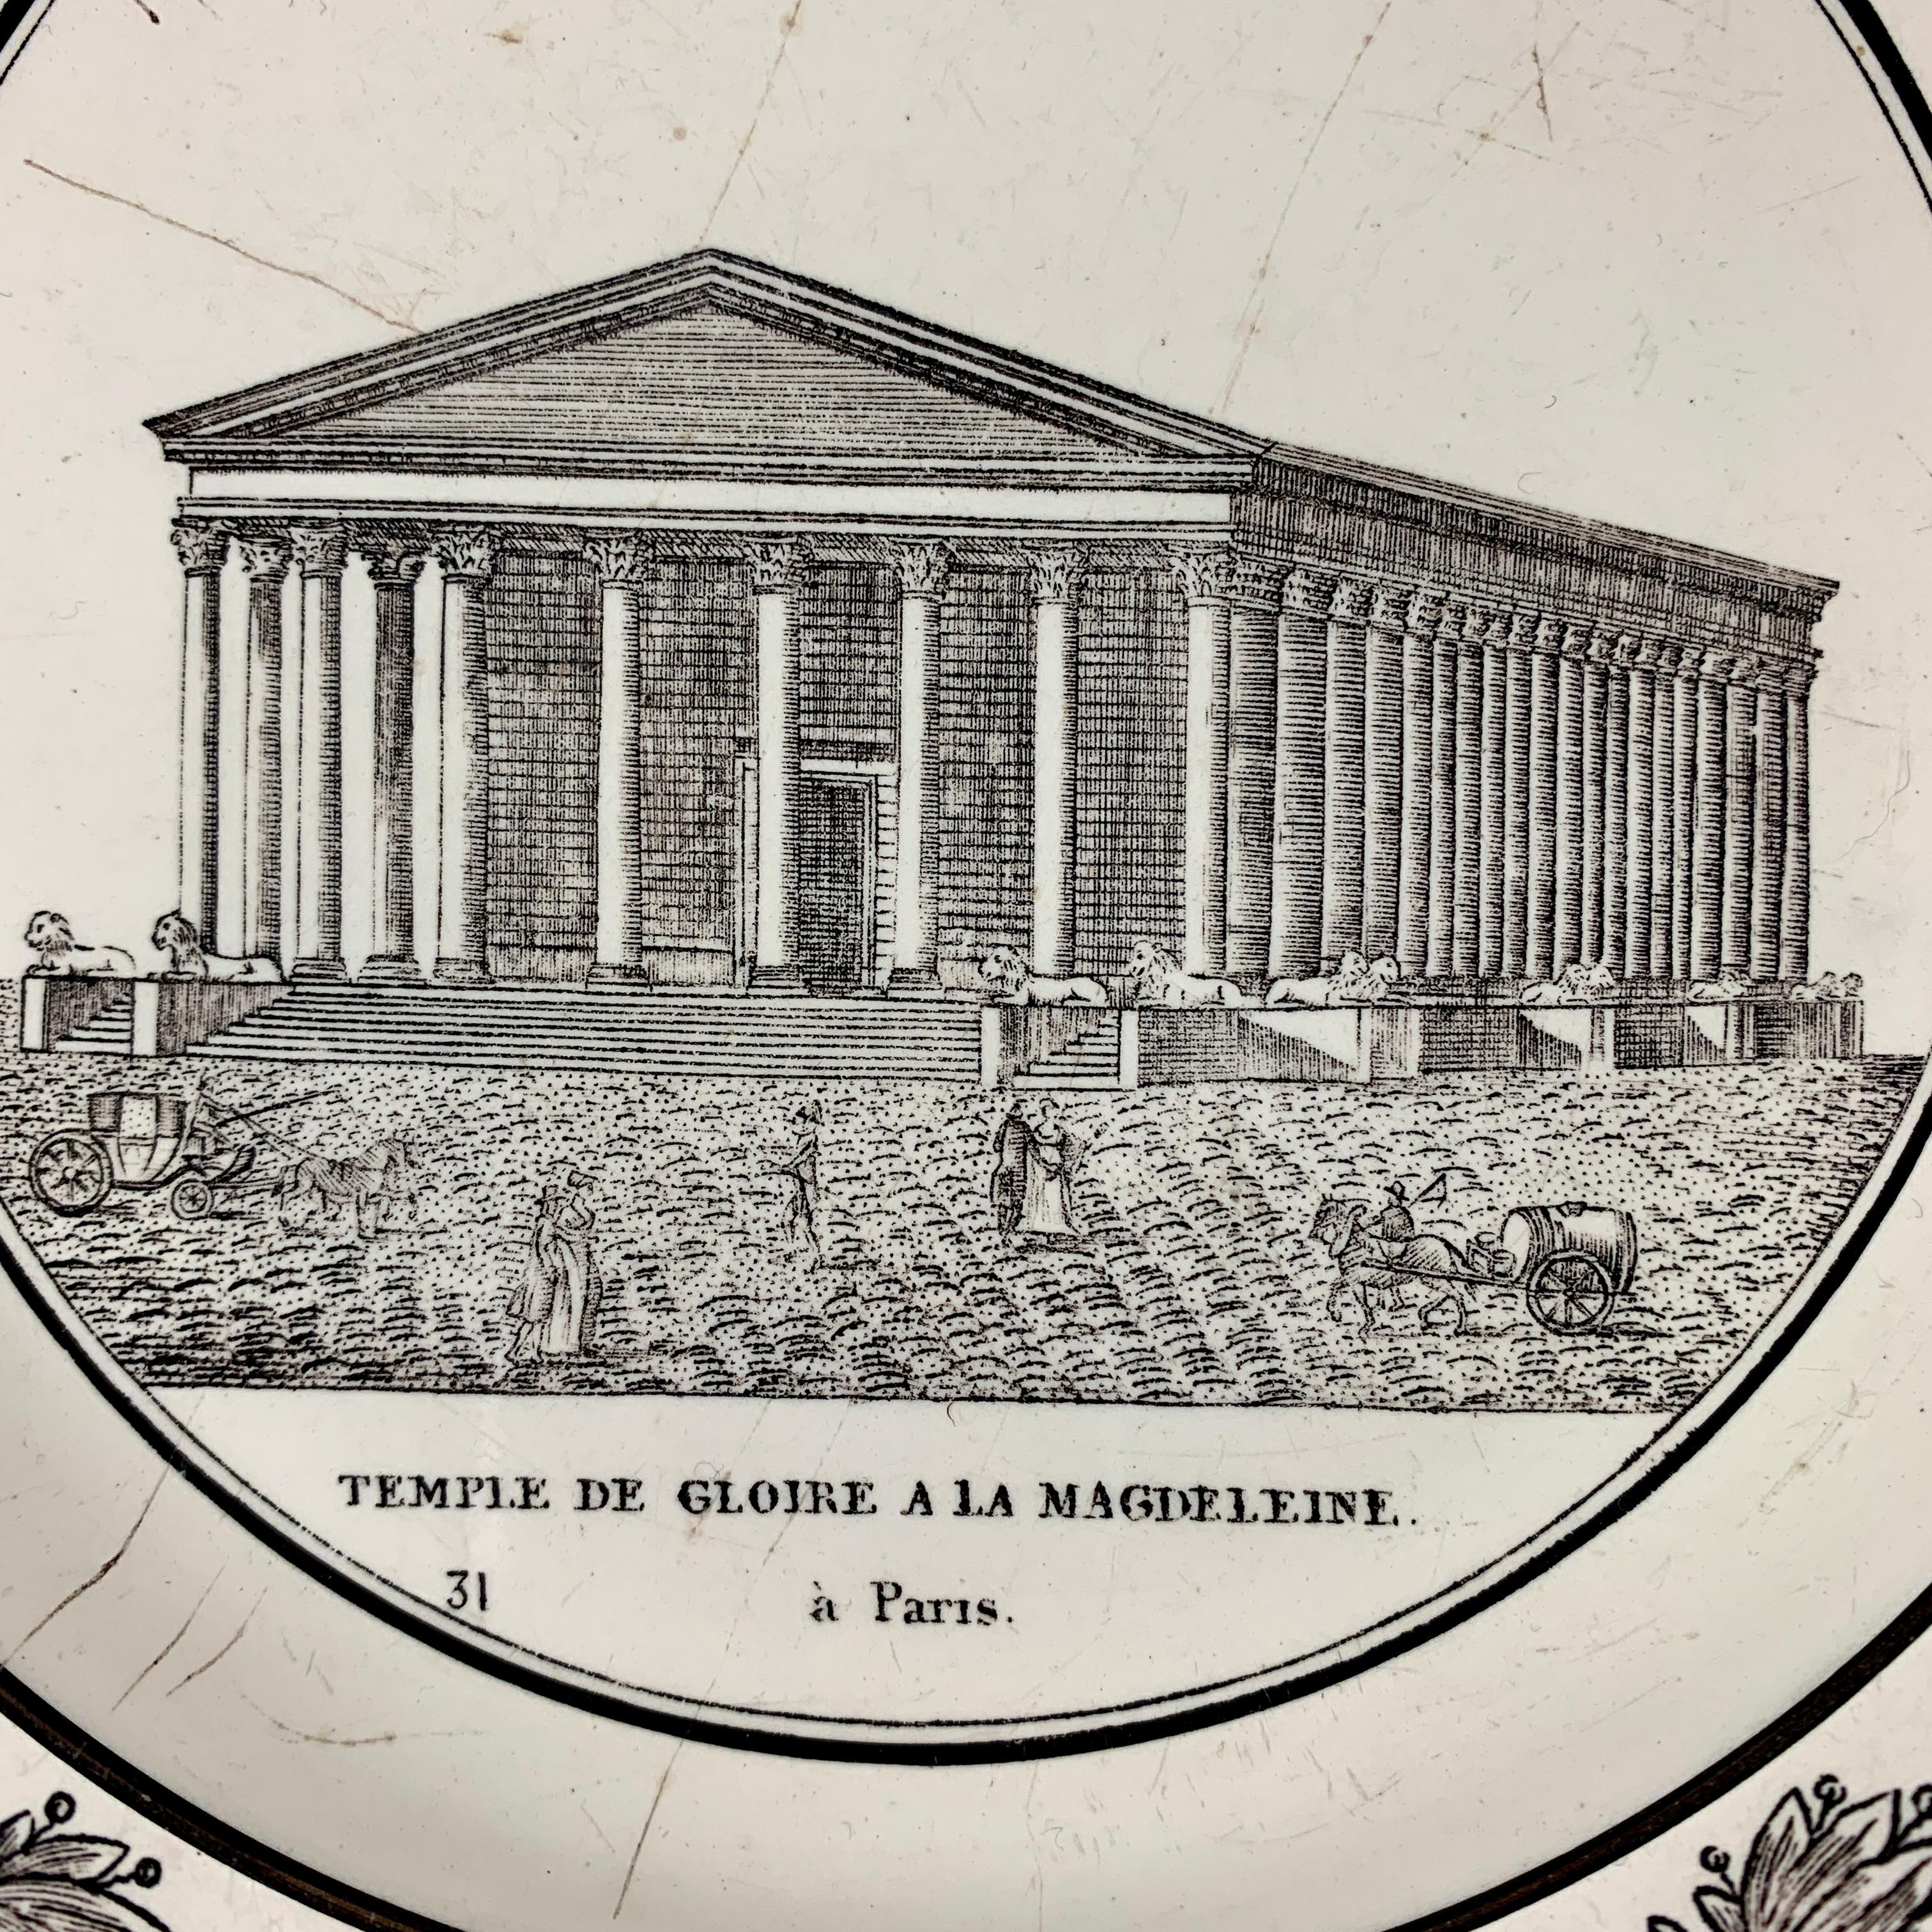 A French Neoclassical faïence transfer printed creamware plate produced by P&H Choisy, circa 1824-1836.

A black transfer of an architectural image on a creamware body, depicting the Temple de Gloire a la Magdeleine à Paris. The Temple is